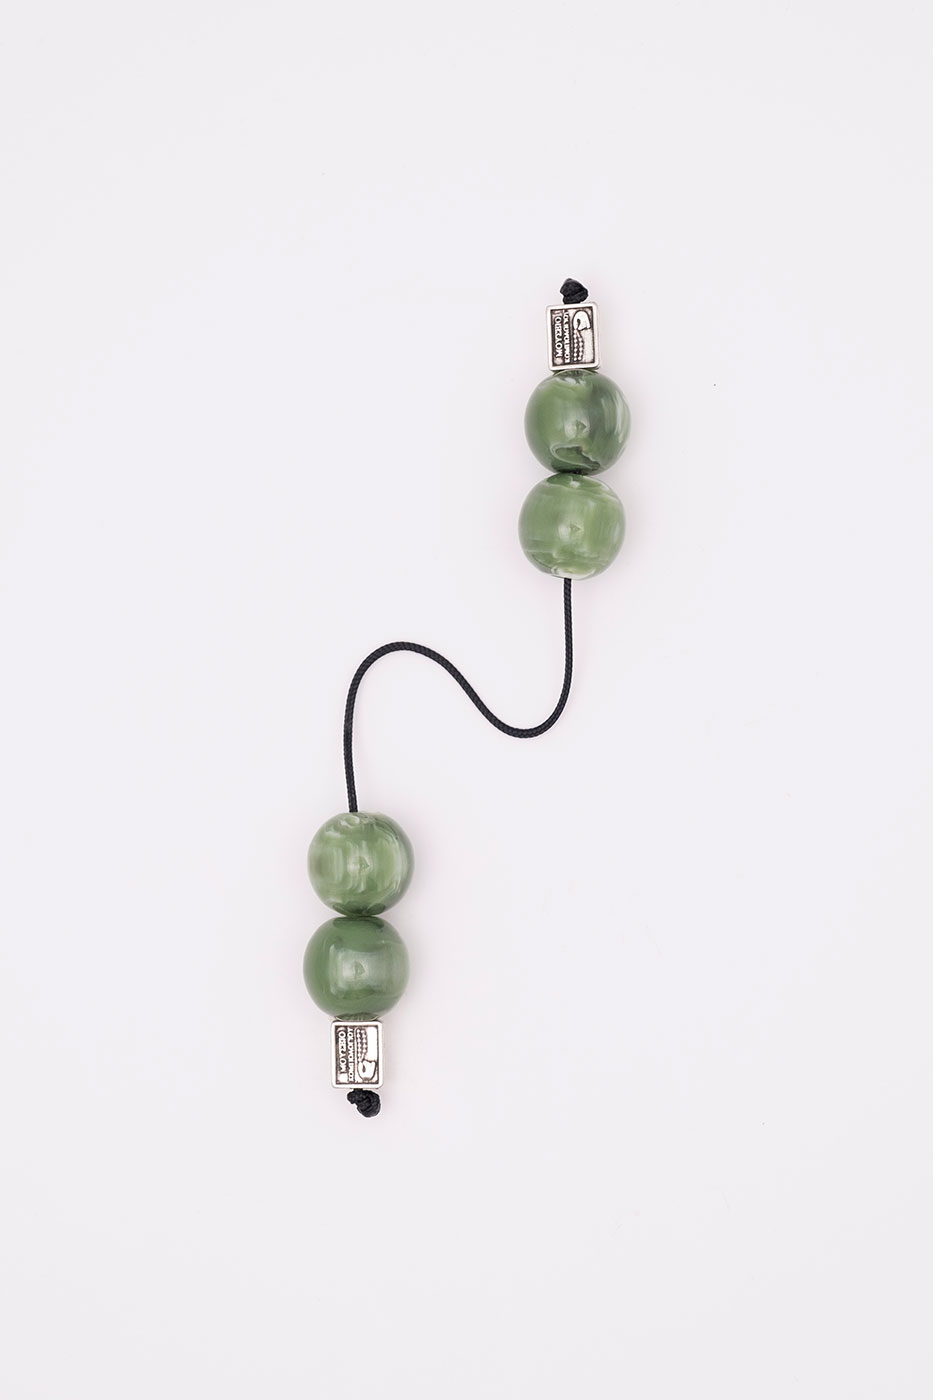 Begleri made of artificial resin (green with water-like shades)